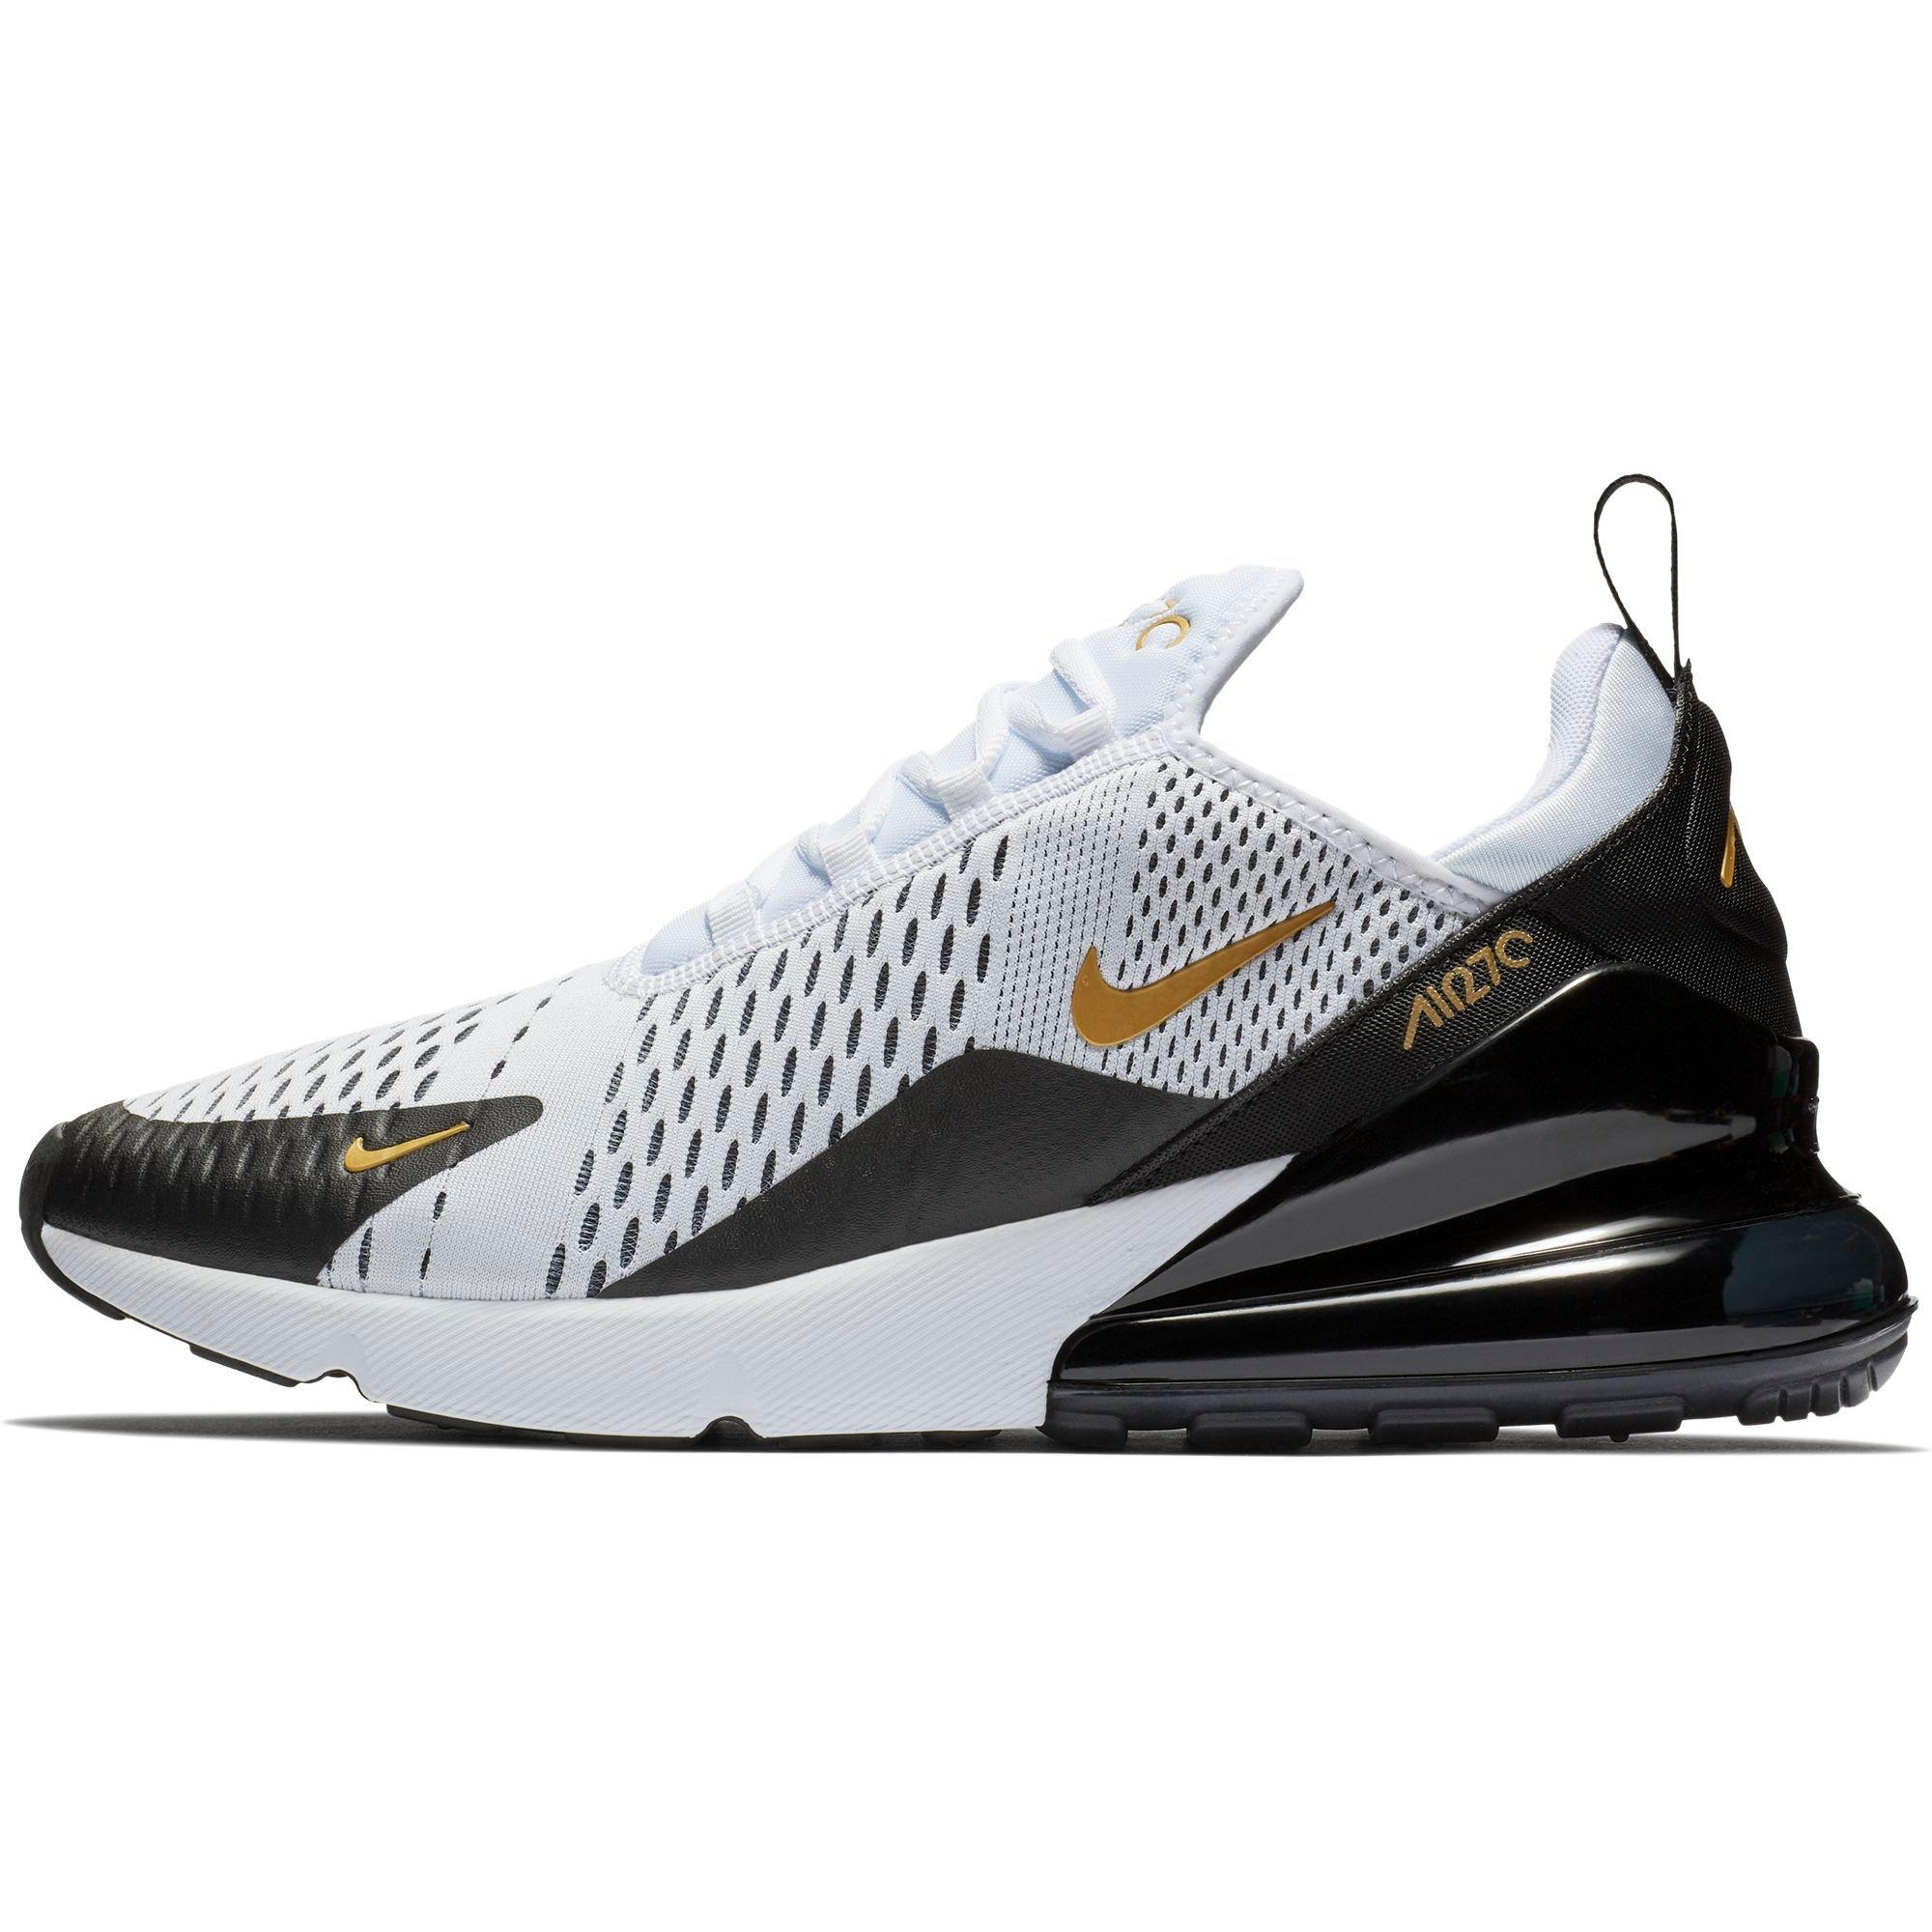 air max 270 black white and gold